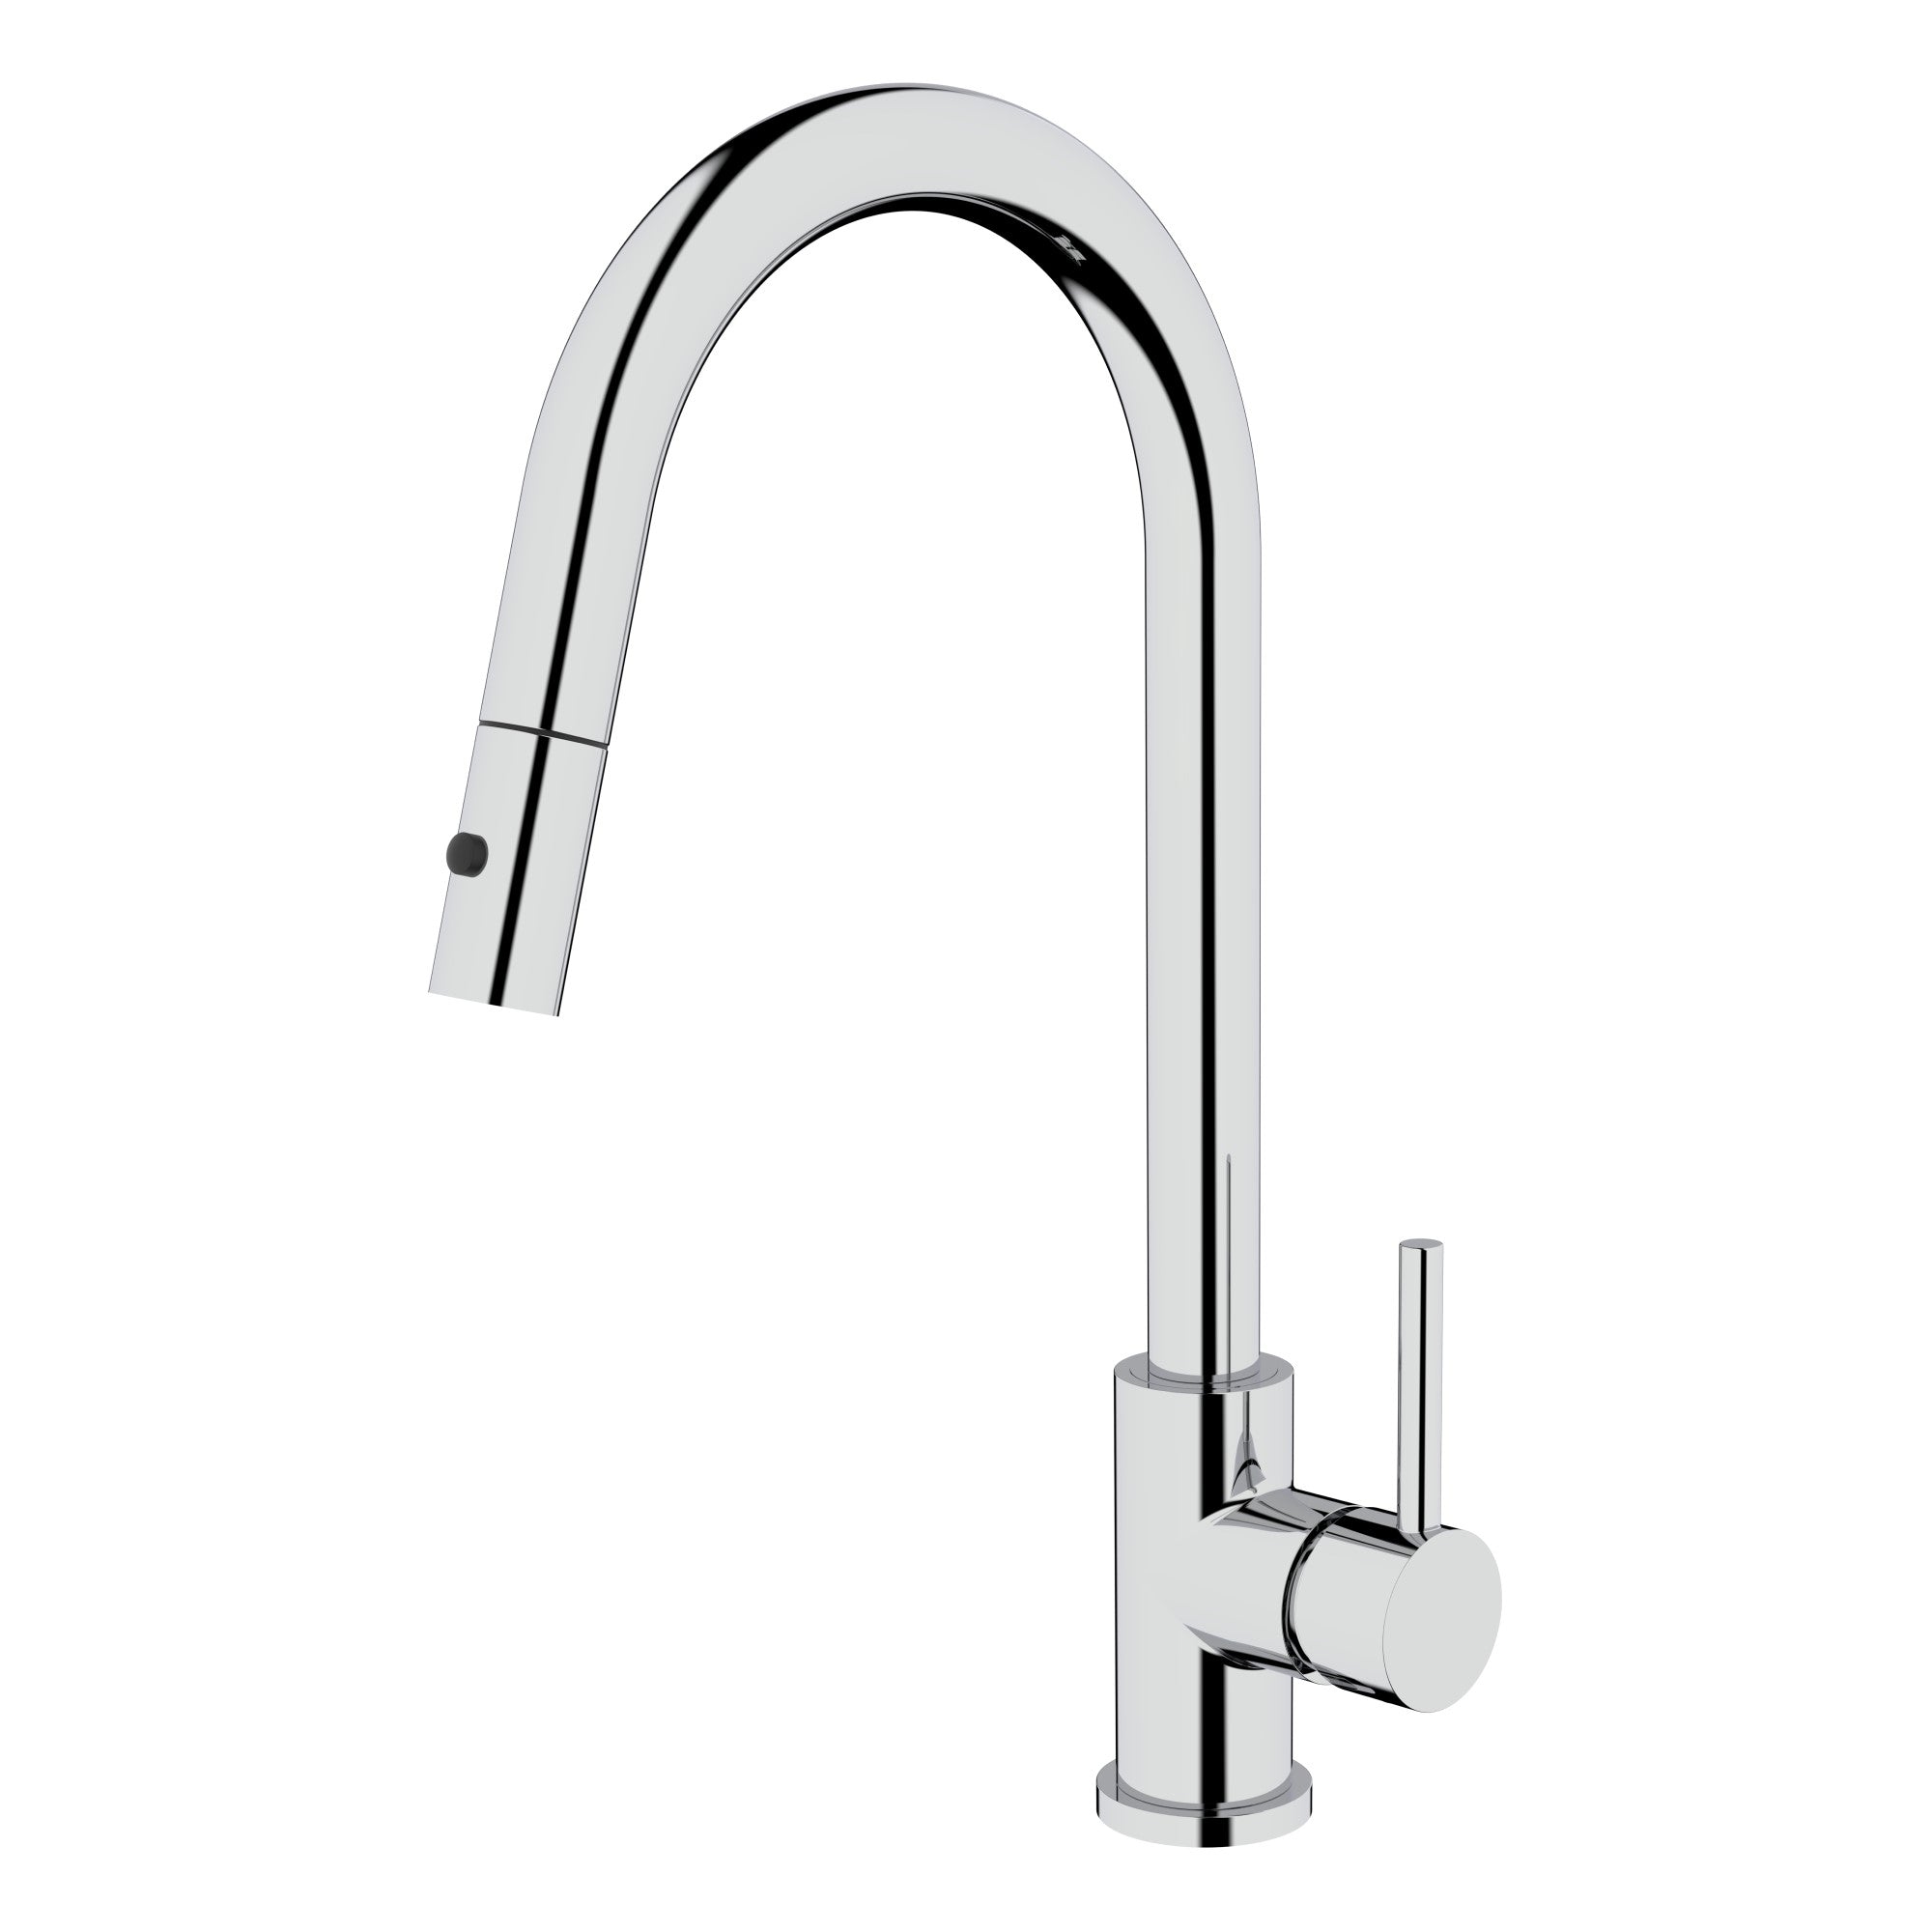 Profile II Kitchen Sink Mixer with Pull-Out, Chrome